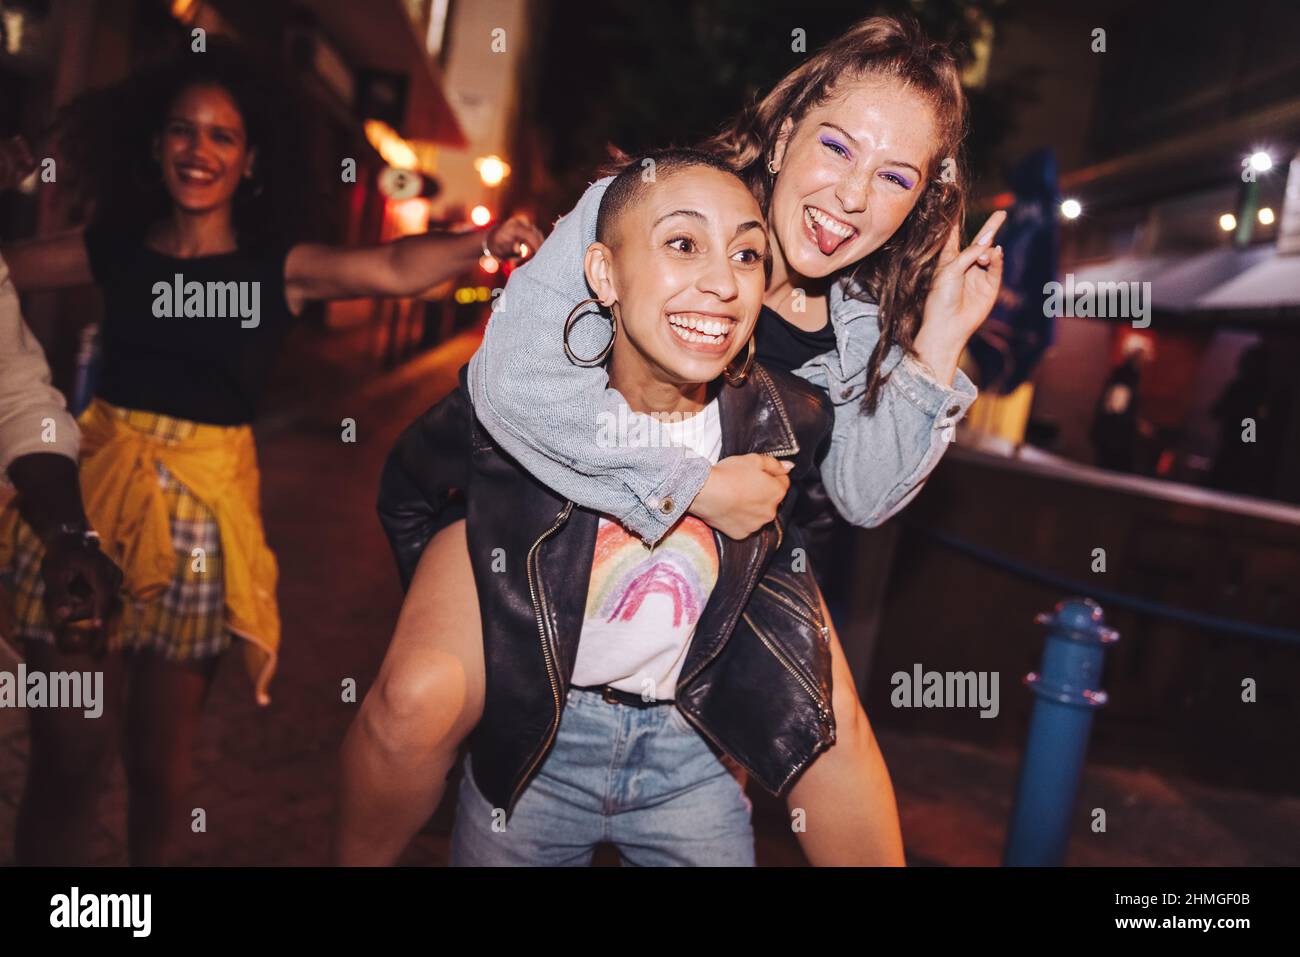 Playful young woman piggybacking her best friend outdoors at night. Happy young women having fun while going out with their friends in the city. Vibra Stock Photo